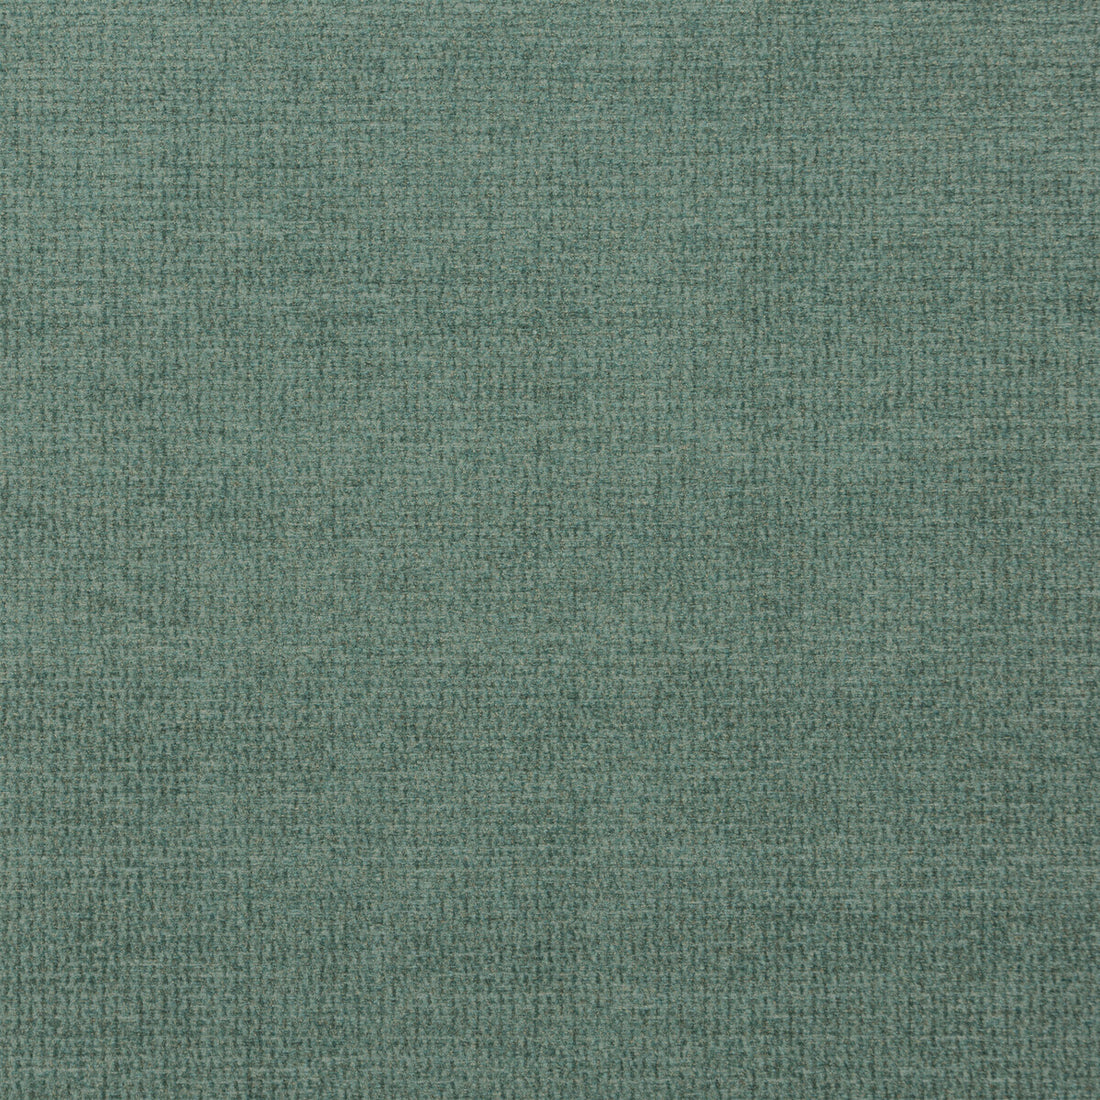 Matrix fabric in verdigris color - pattern BF10686.774.0 - by G P &amp; J Baker in the Essential Colours collection